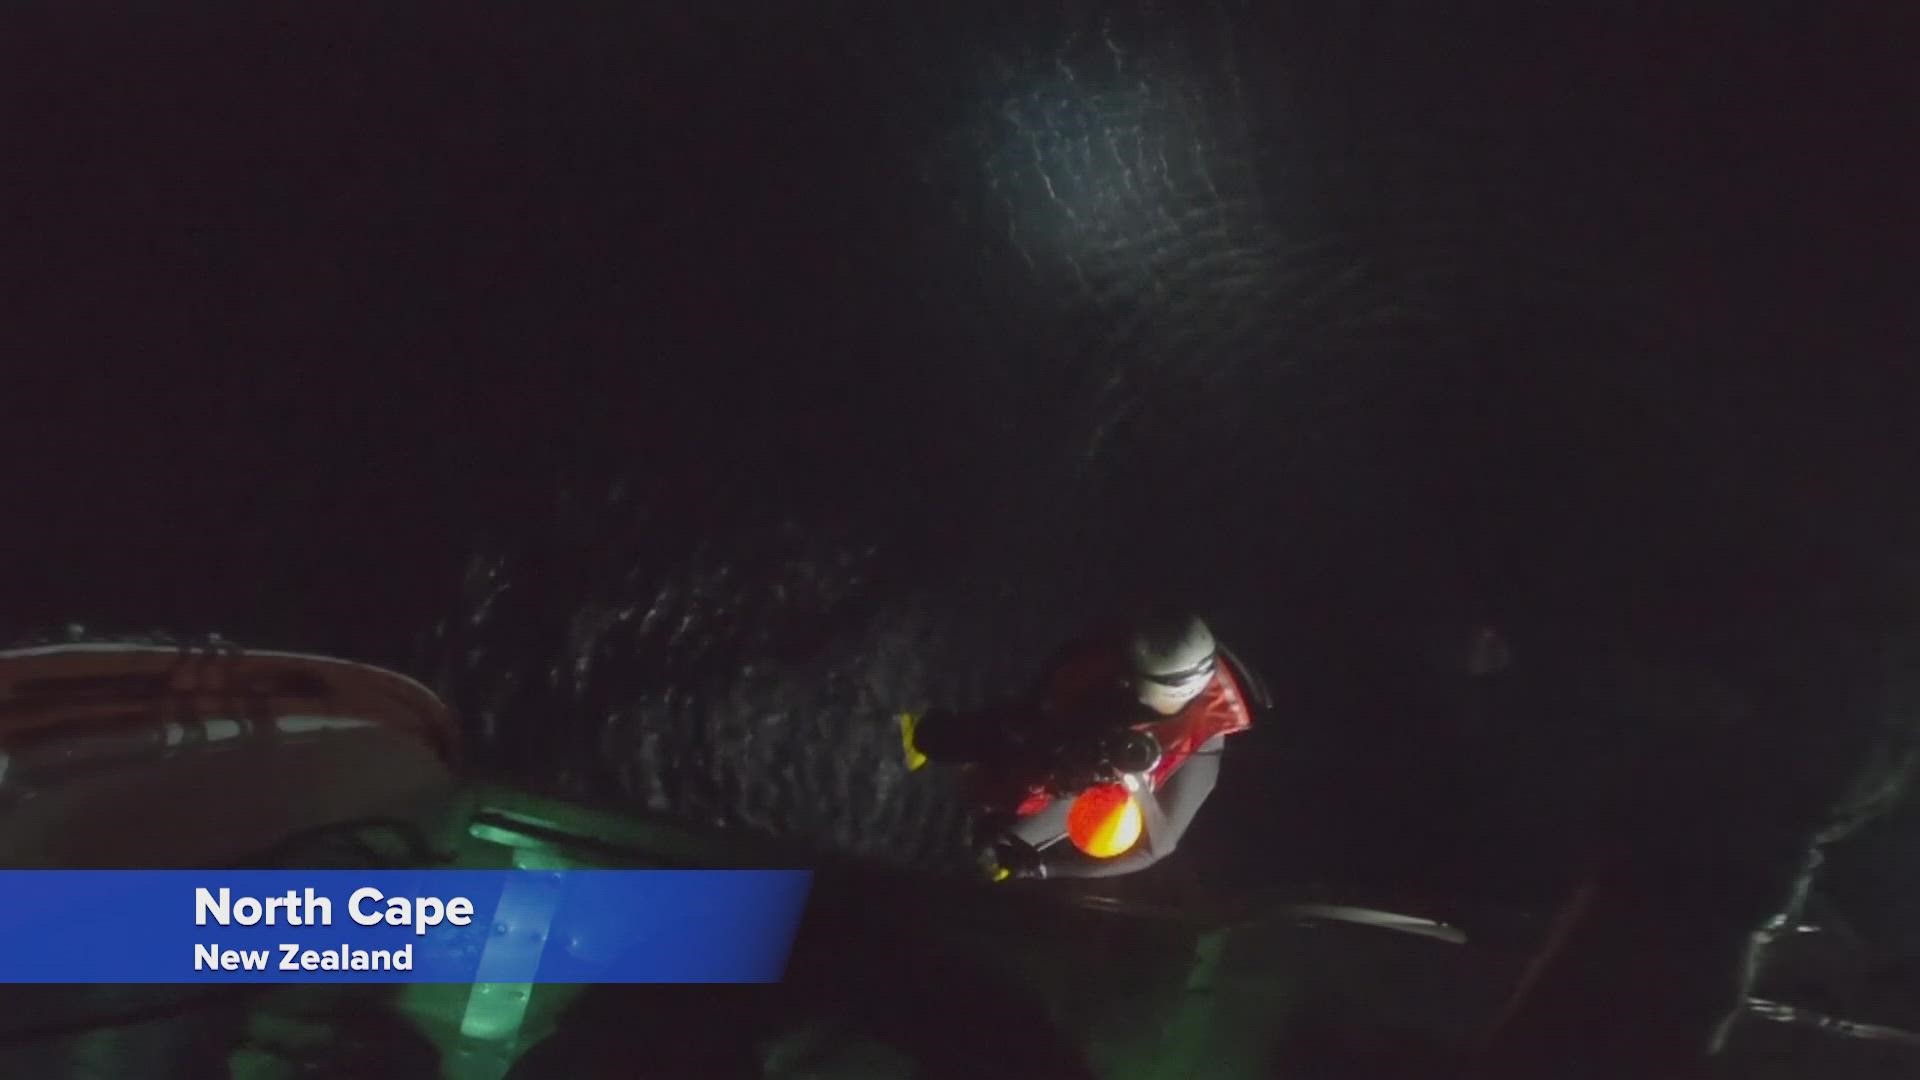 A man clinging in the dark to the wreckage of a fishing boat let go and leapt into the arms of a rescue swimmer in New Zealand.